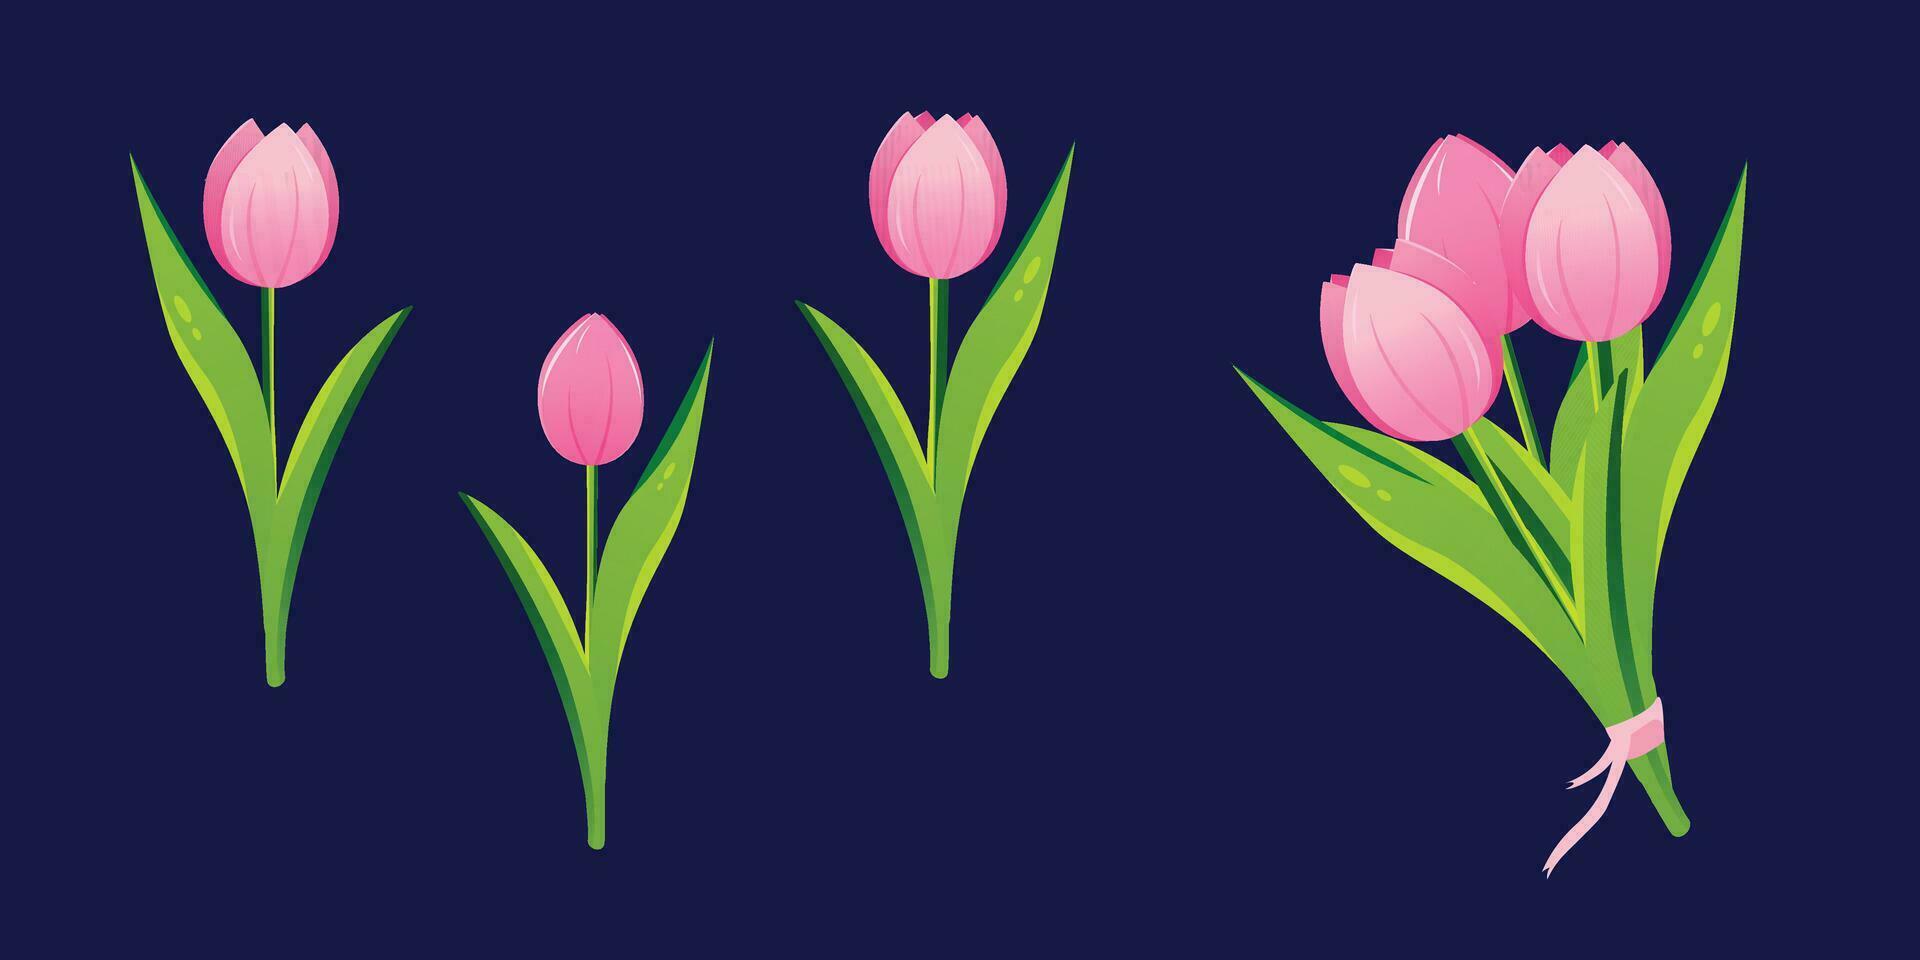 Tulip flowers set. Flower plants with pink petals. Botanical vector illustration on isolated background. Spring flowers for women's day, mother's day, easter and other holidays. Pink tulippans